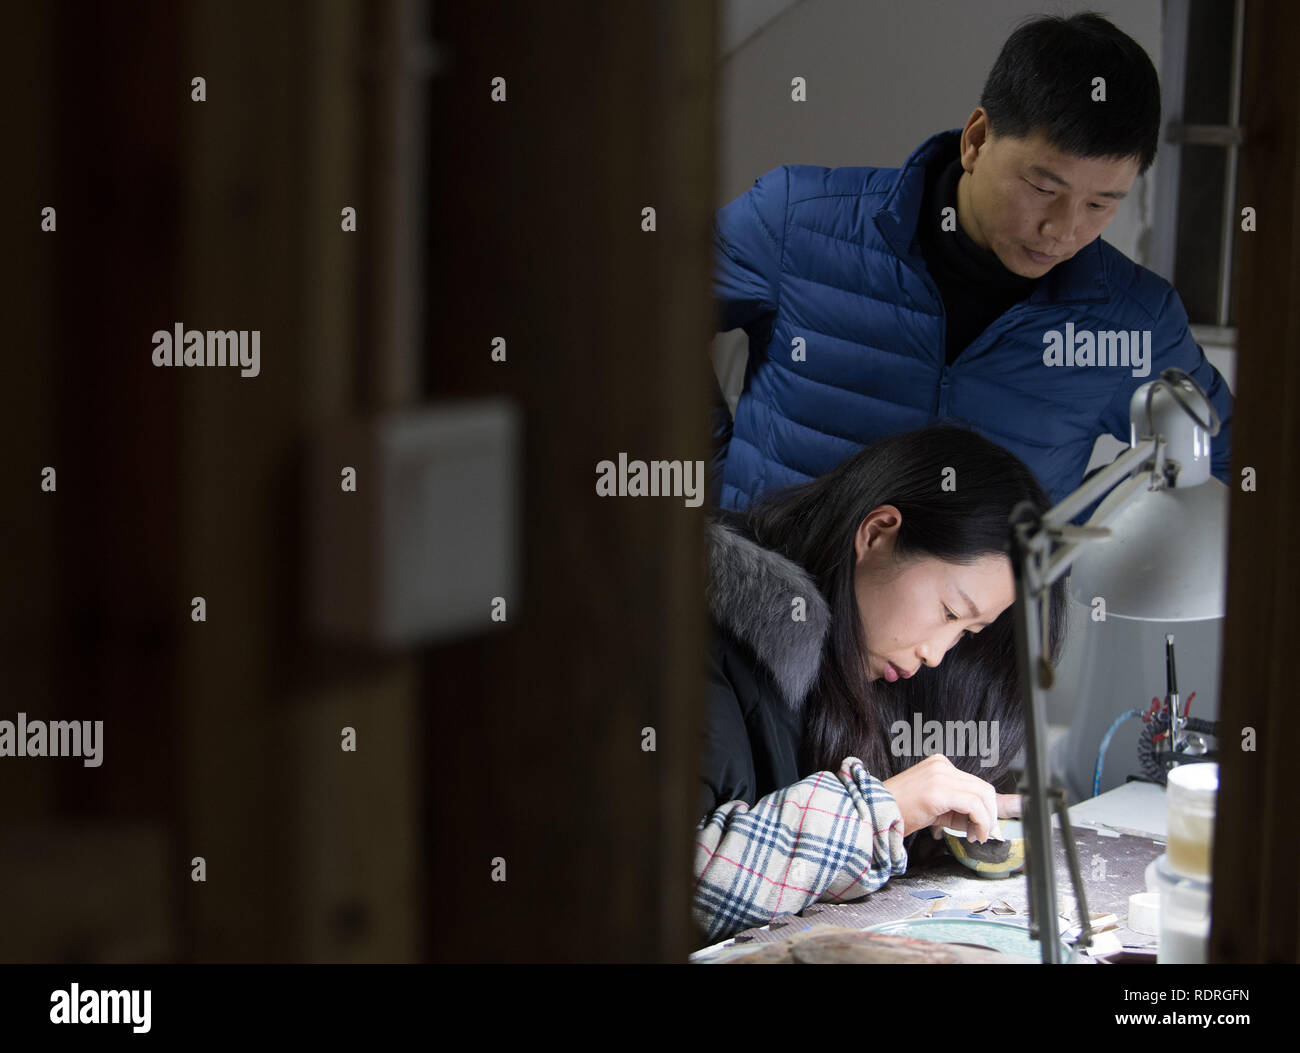 (190119) -- LONGQUAN, Jan. 19, 2019 (Xinhua) -- CHINA-ZHEJIANG-LONGQUAN-LACQUER ART (CN) Wu Rongqiang looks on as his wife Li shumin repairs a celadon ware with lacquer at his studio in Niutouling Village, Longquan City of east China's Zhejiang Province, Jan. 15, 2019. Wu Rongqiang, a Longquan native aged 45, started exploring traditional lacquer art since 2012. In 2017, he moved his family to an old house deep in the mountains in Longquan in order to do more experiments in lacquer undisturbed. He uses lacquer to repair broken porcelain and to create lacquerware. Also, he experimen Stock Photo